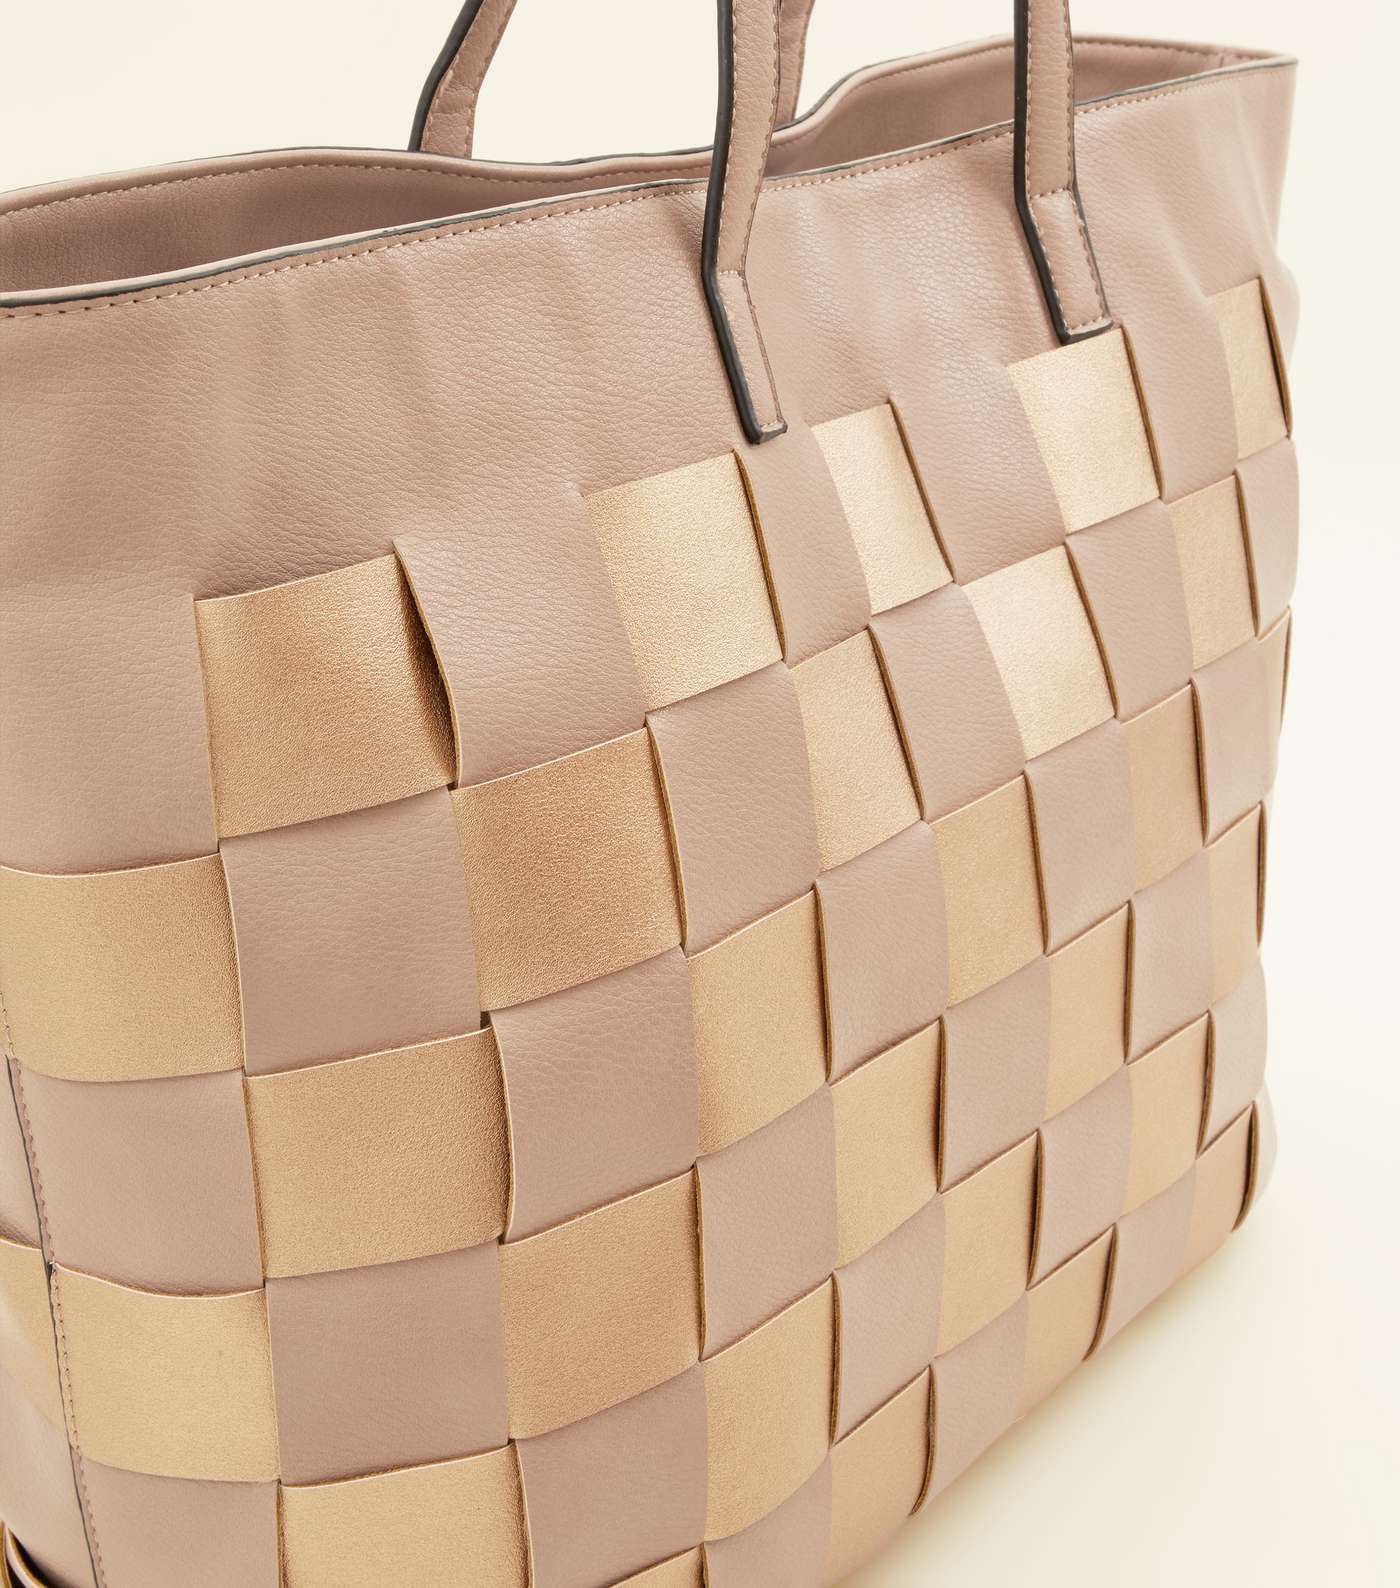 Nude Leather-Look Woven Tote Bag Image 3